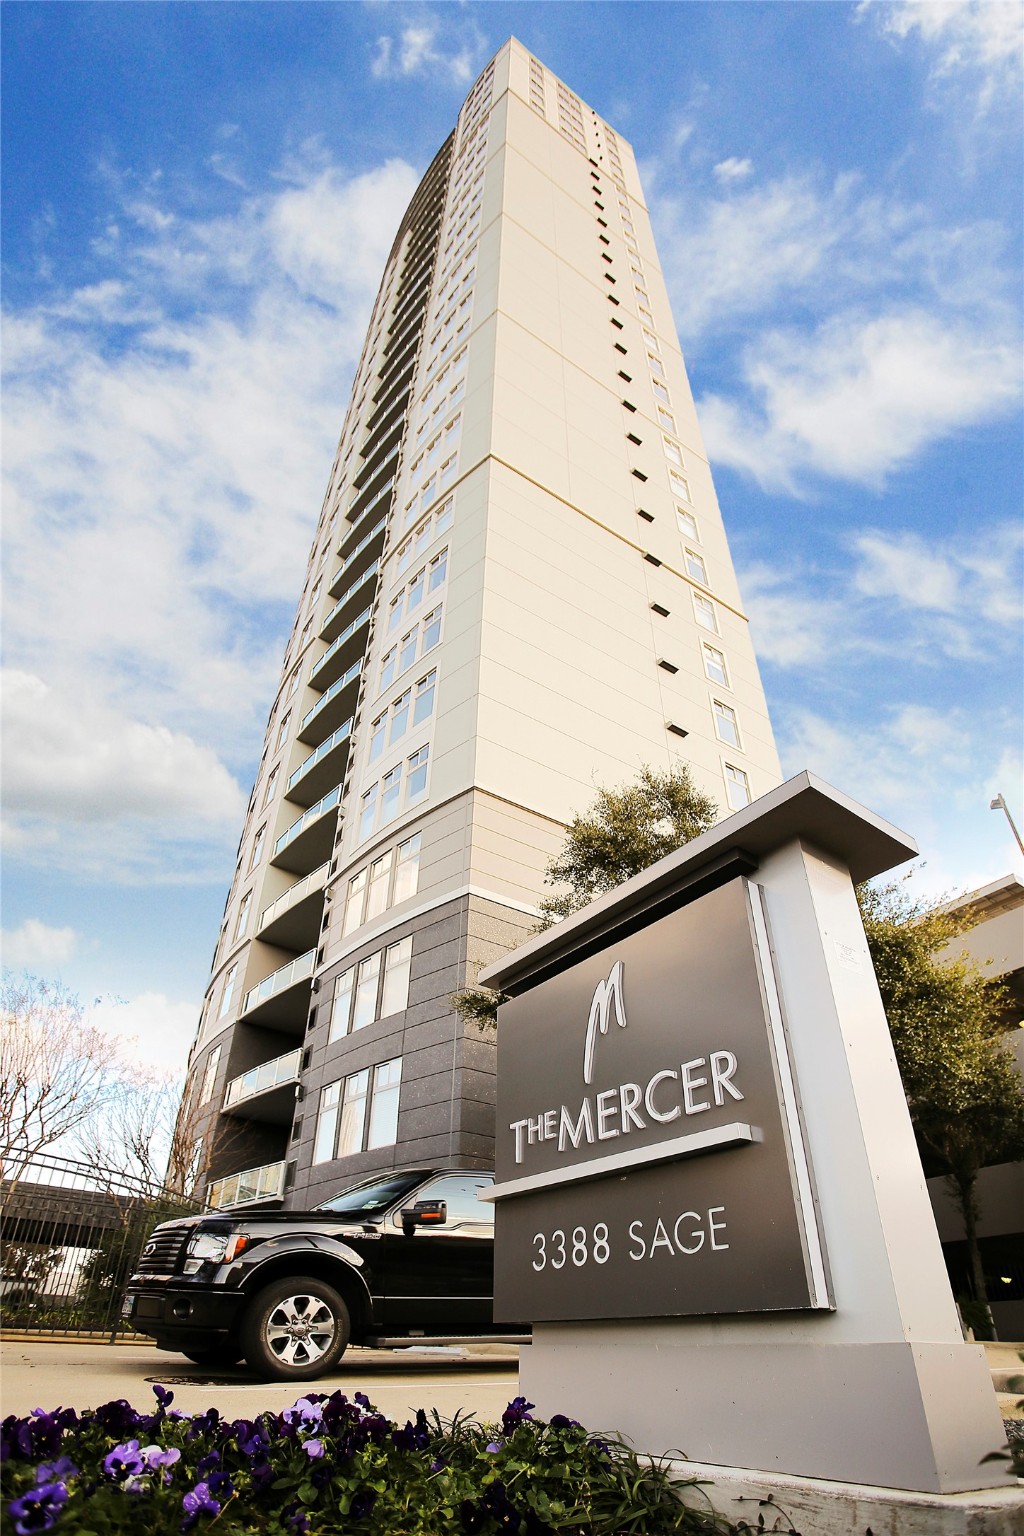 The Mercer is located in the heart of The Galleria area. The Mercer amenities include 24 hour security, swimming pool, and exercise room..